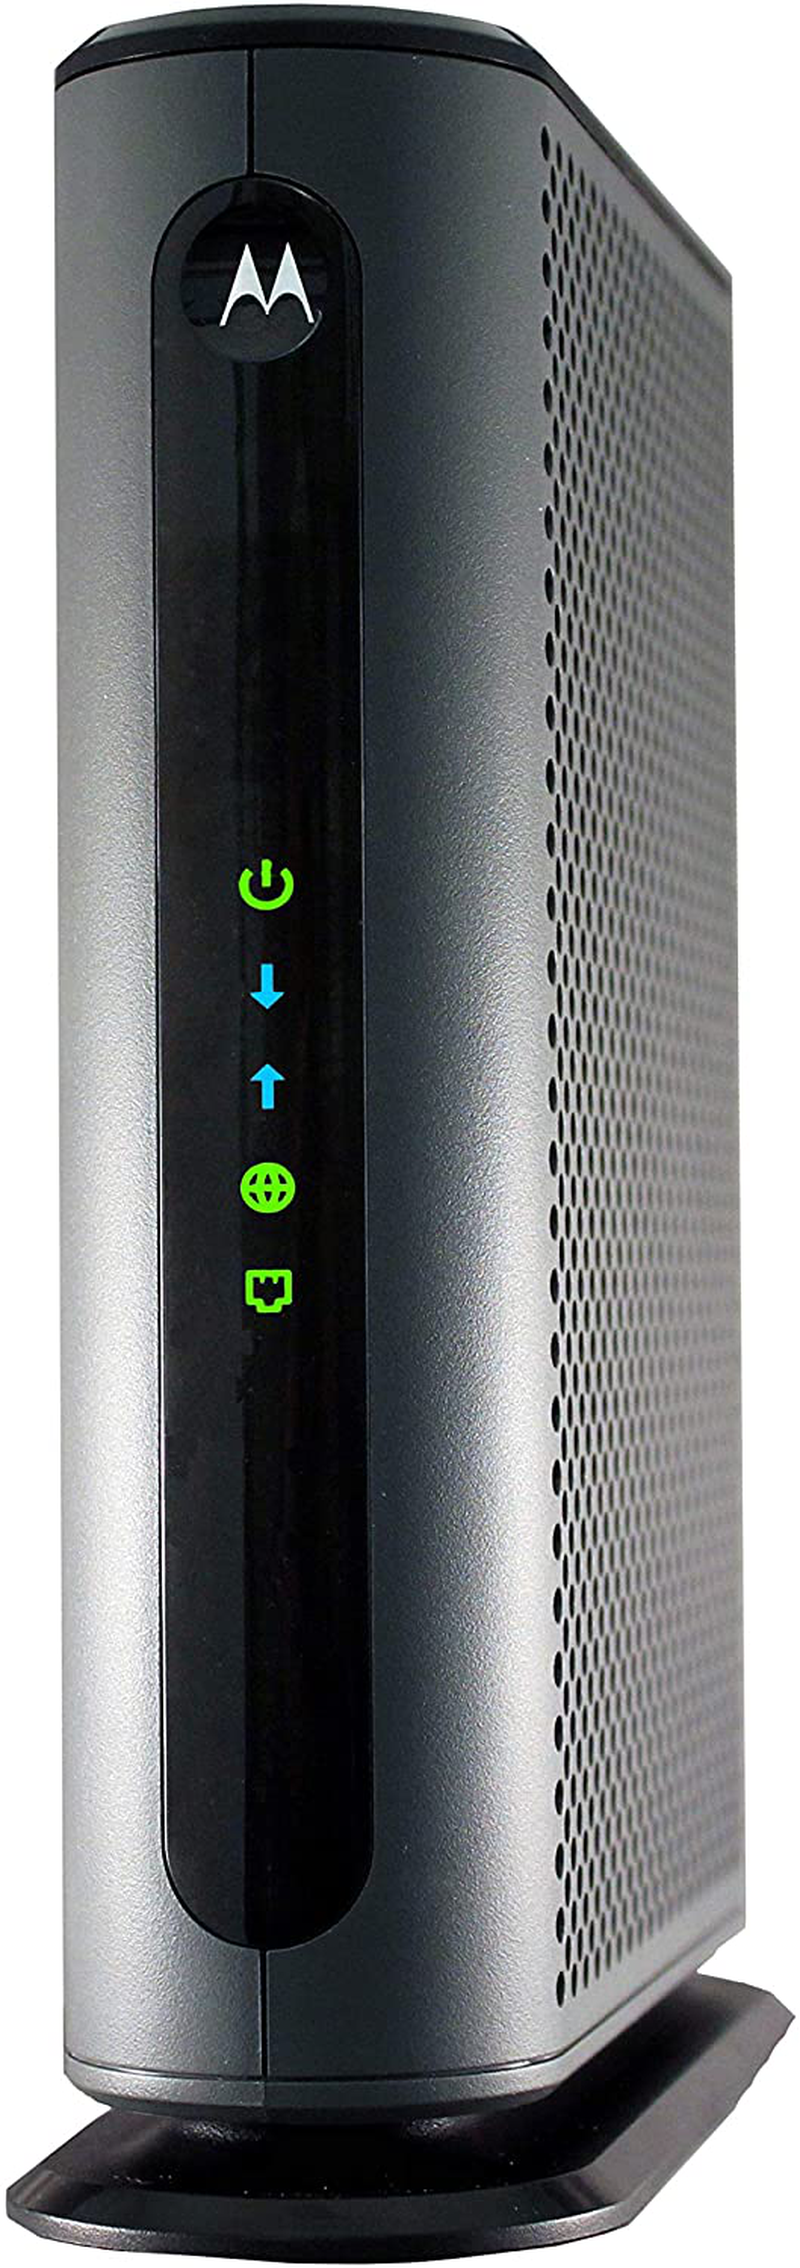 Motorola MB8600 DOCSIS 3.1 Cable Modem, 6 Gbps Max Speed. Approved for Comcast Xfinity Gigabit, Cox Gigablast, and More, Black Electronics > Networking > Modems MTRLC LLC DOCSIS 3.1 (1 Gbps Ethernet Port)  